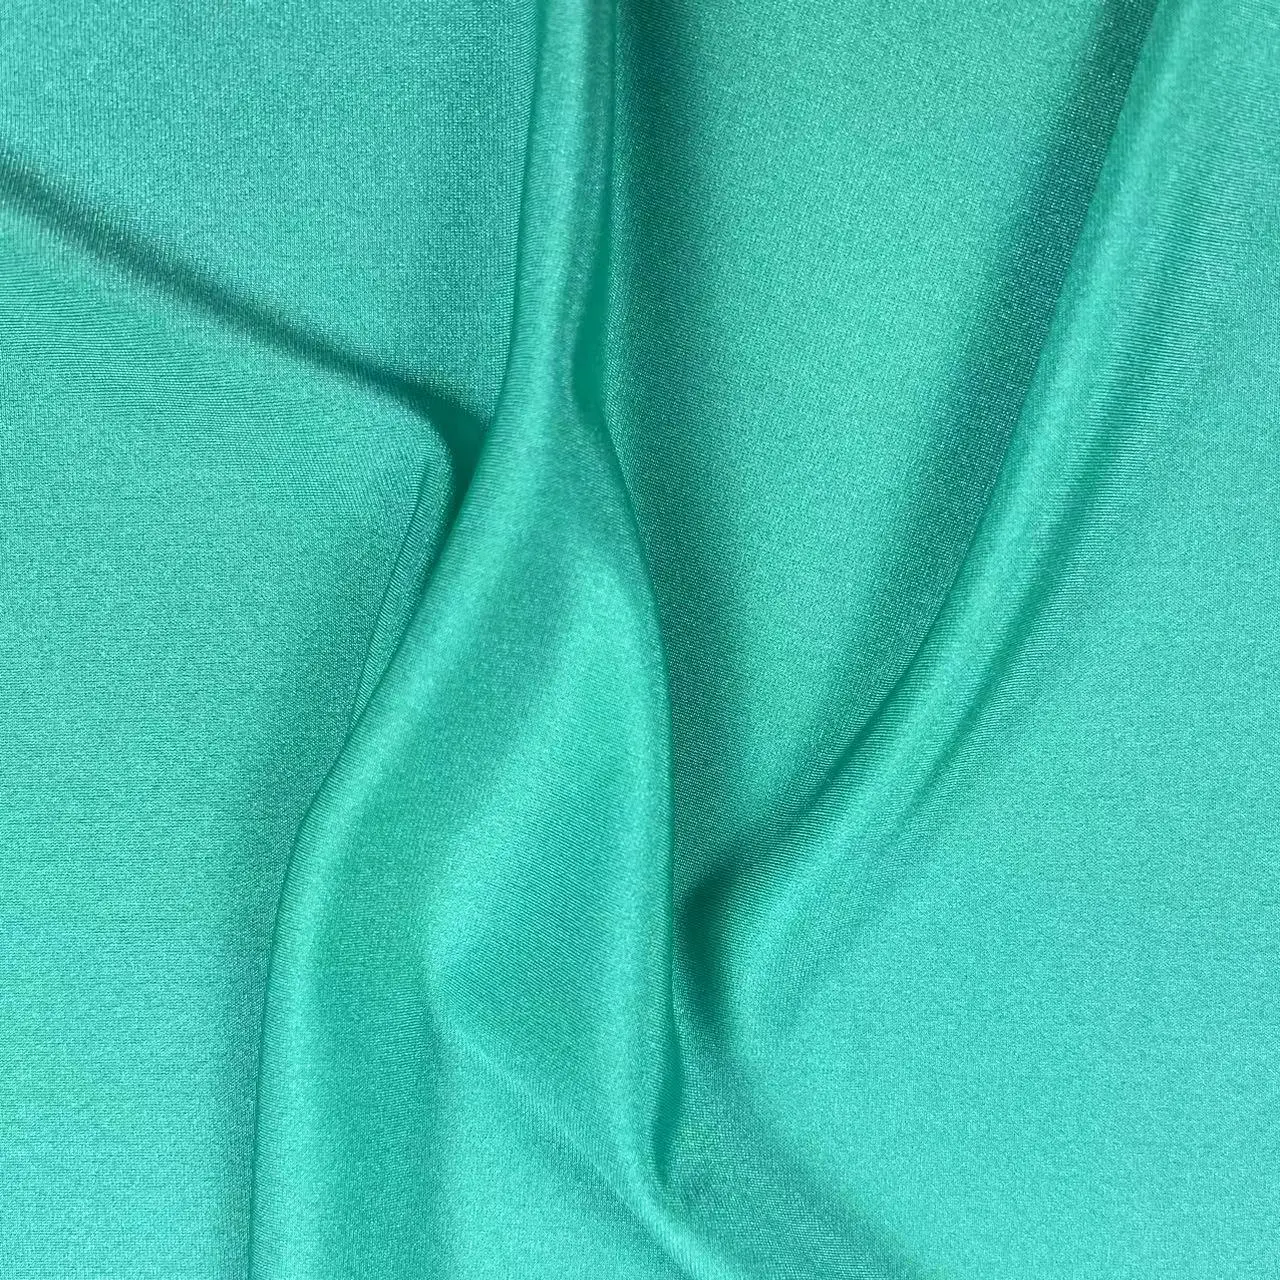 Soft touch and shiny quick dry material 4 way stretch spandex nylon fabric for swimwear yoga